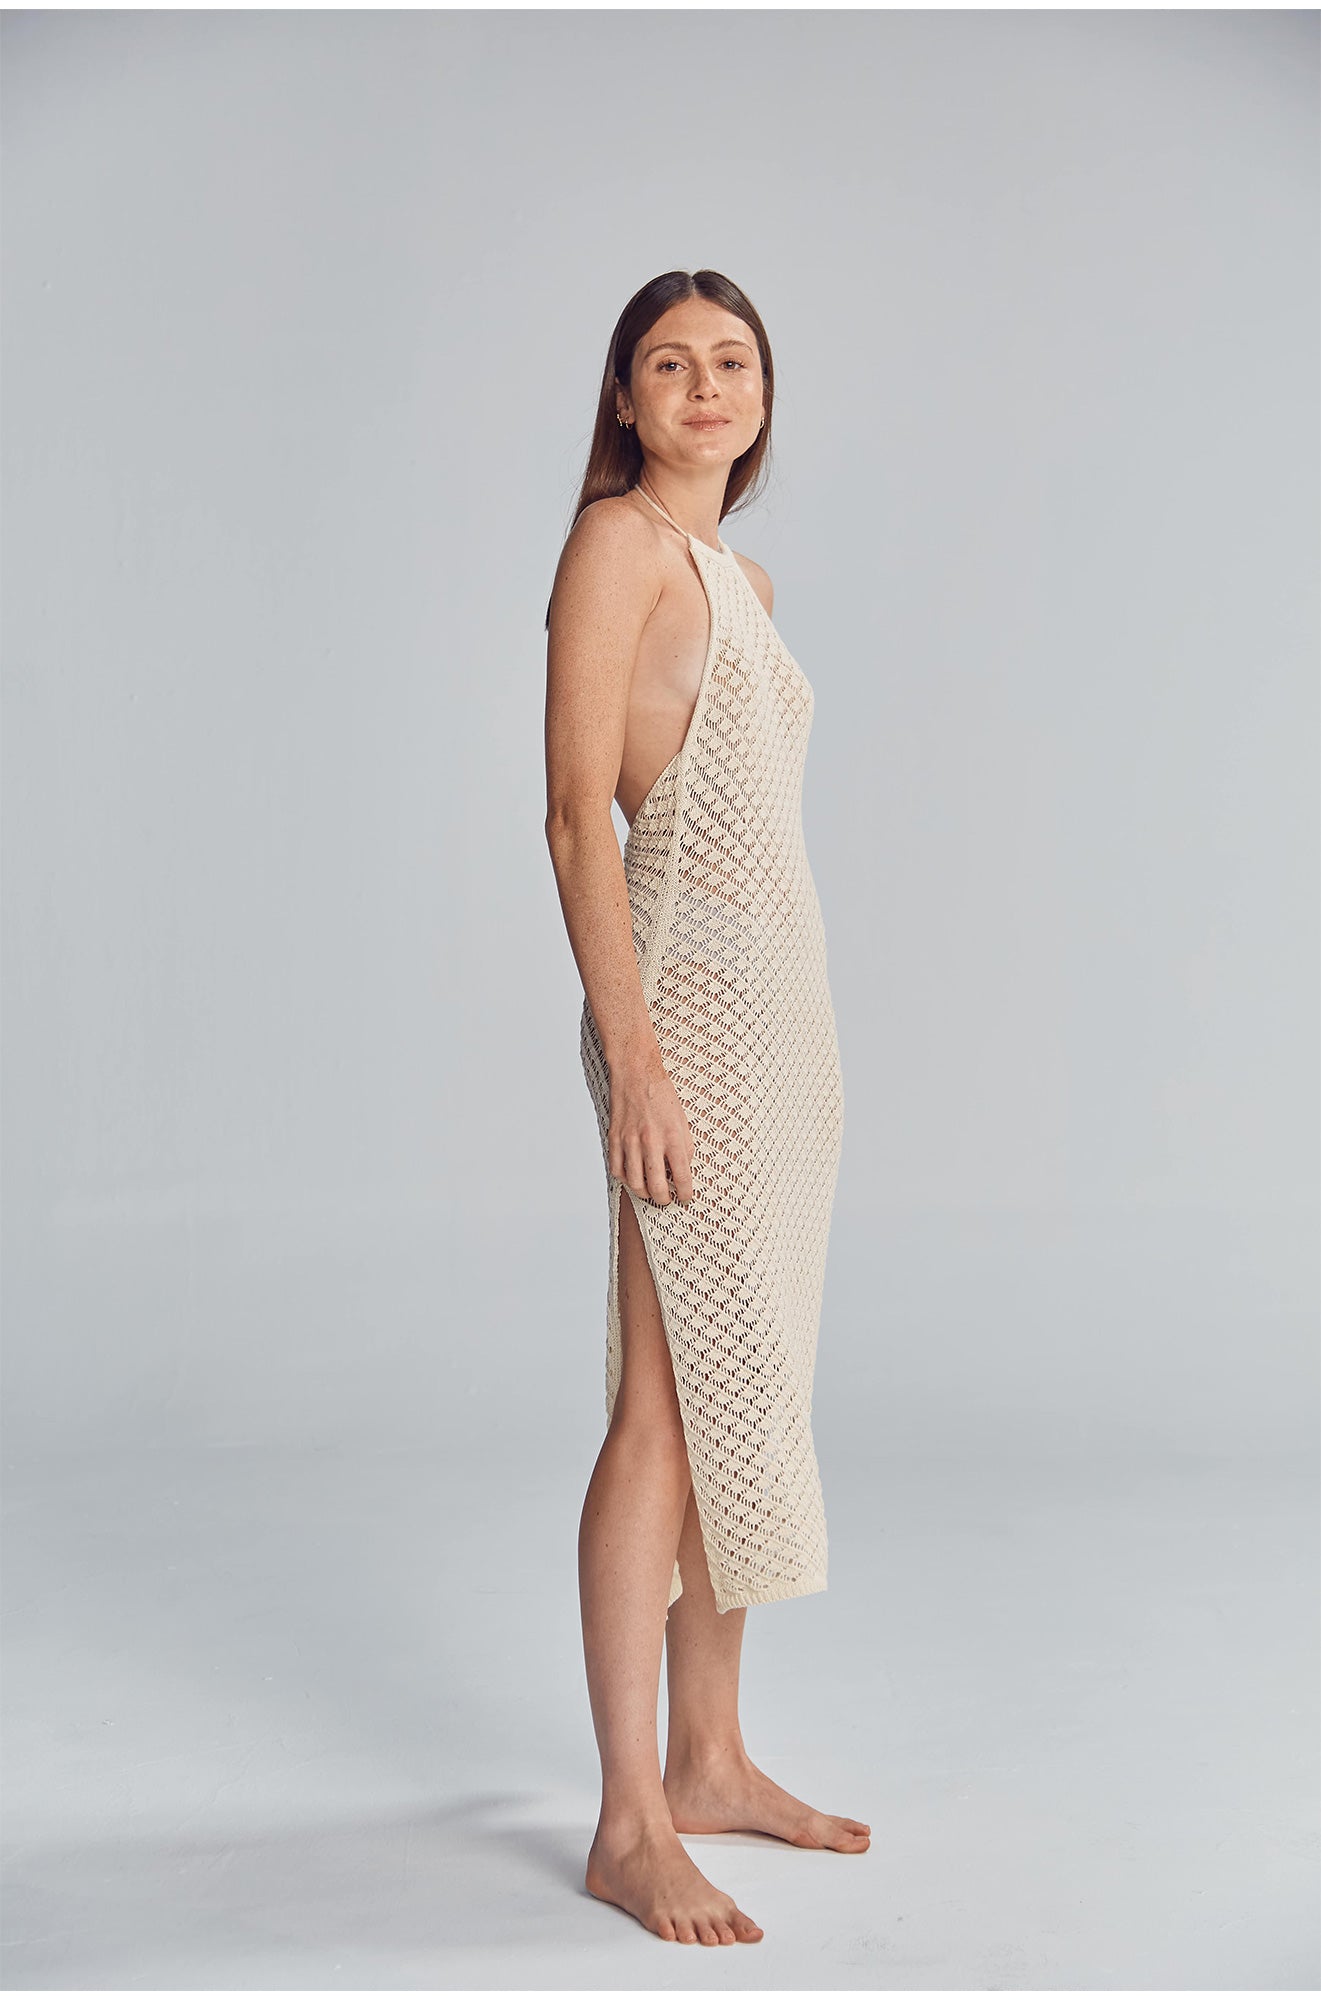 Halter midi dress featuring a side slit, and fully exposed back. Handmade crochet by Peruvian artisans.  50% Cotton, 50% Polyester. Made in Peru